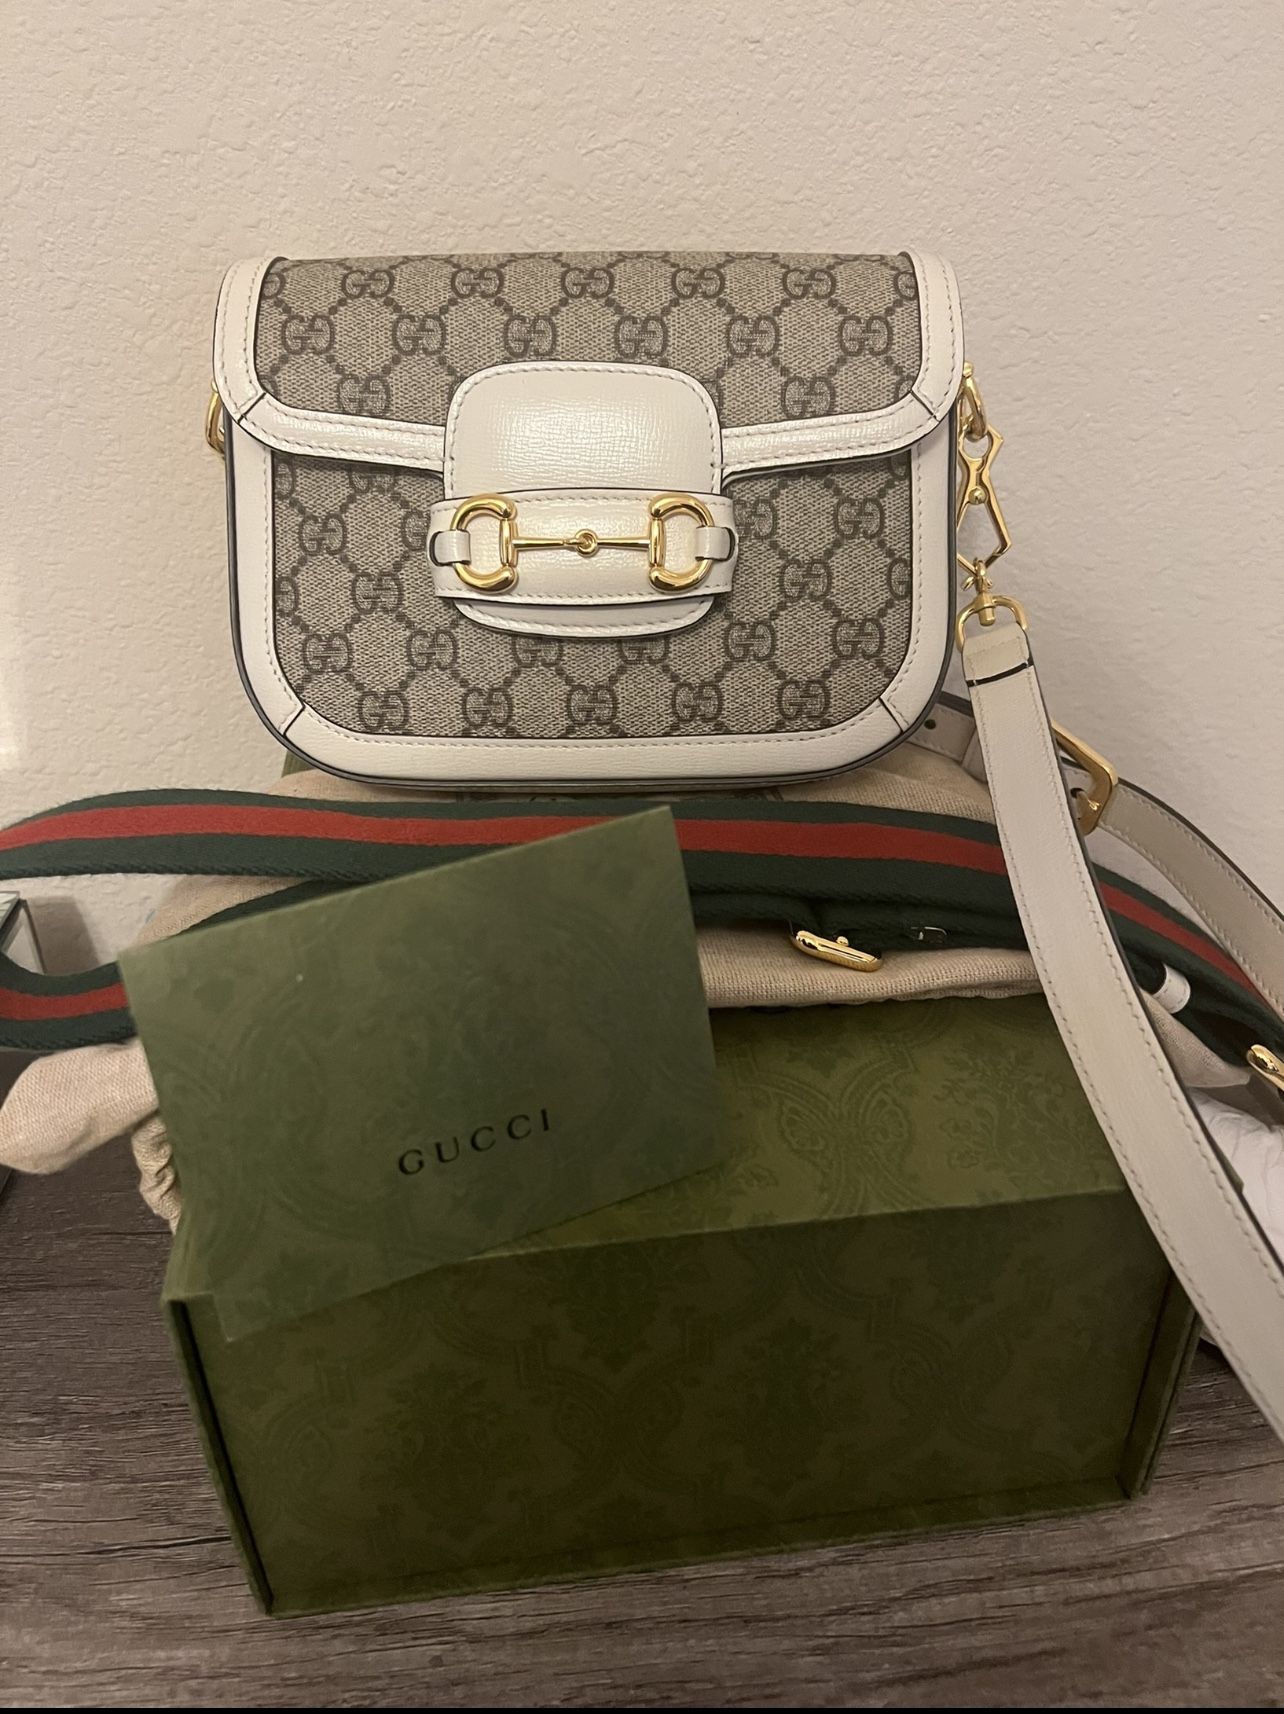 Gucci Purse and Wallet obo